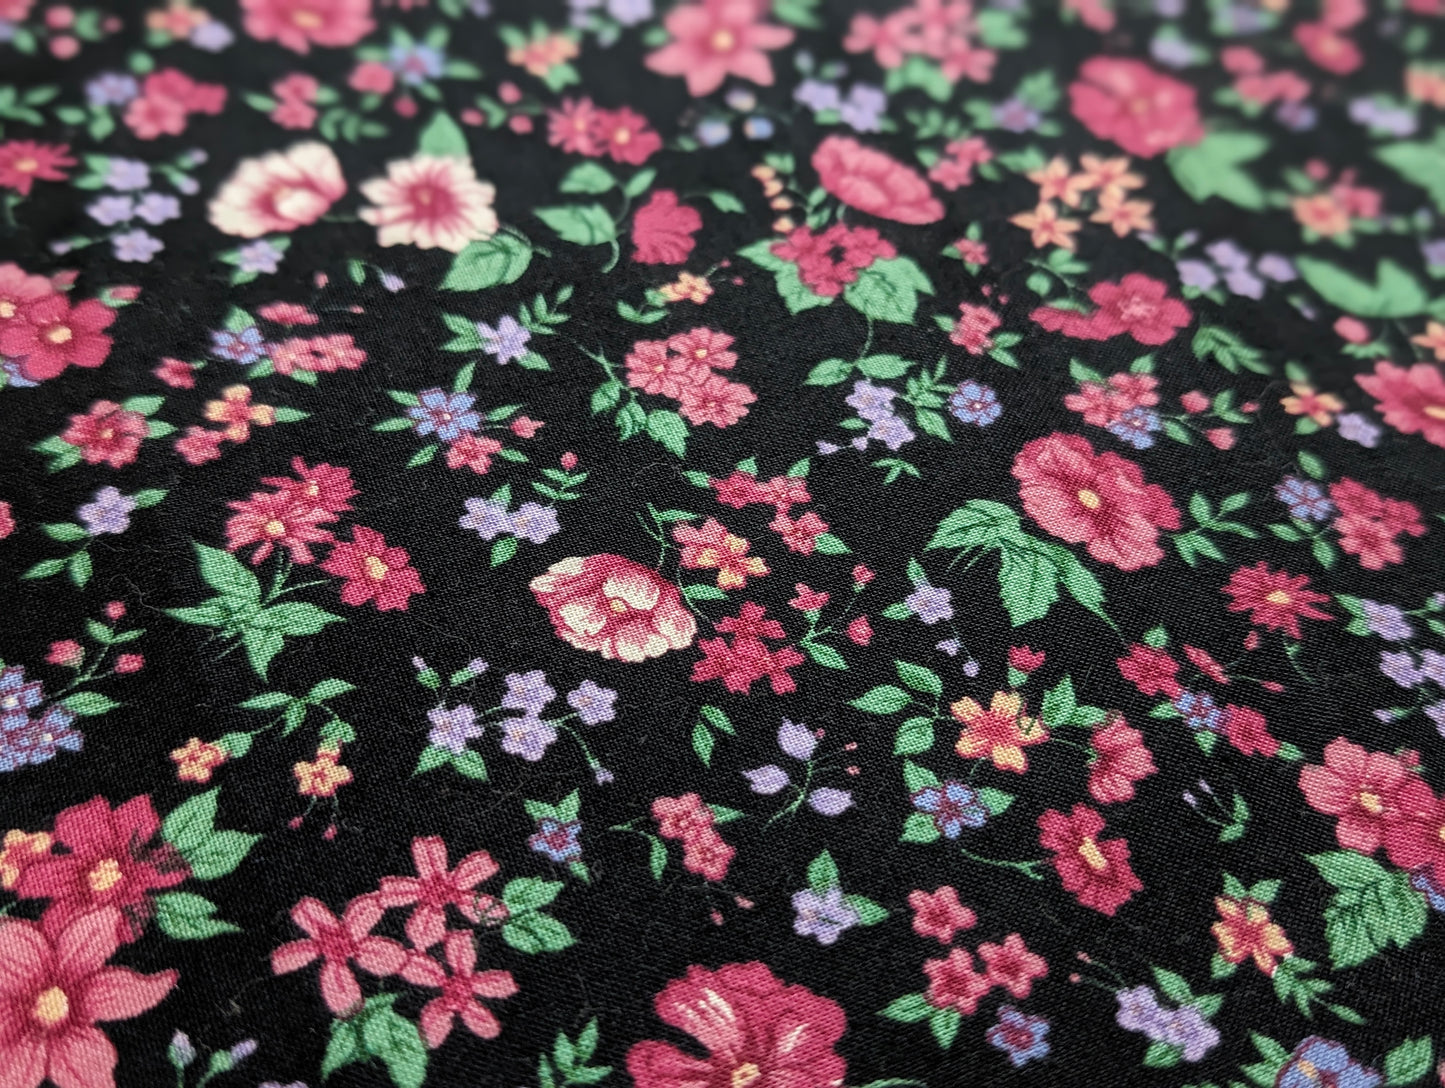 Vintage Fabric - "Independence" Cotton Tropical Flower Fabric By R.E.D.